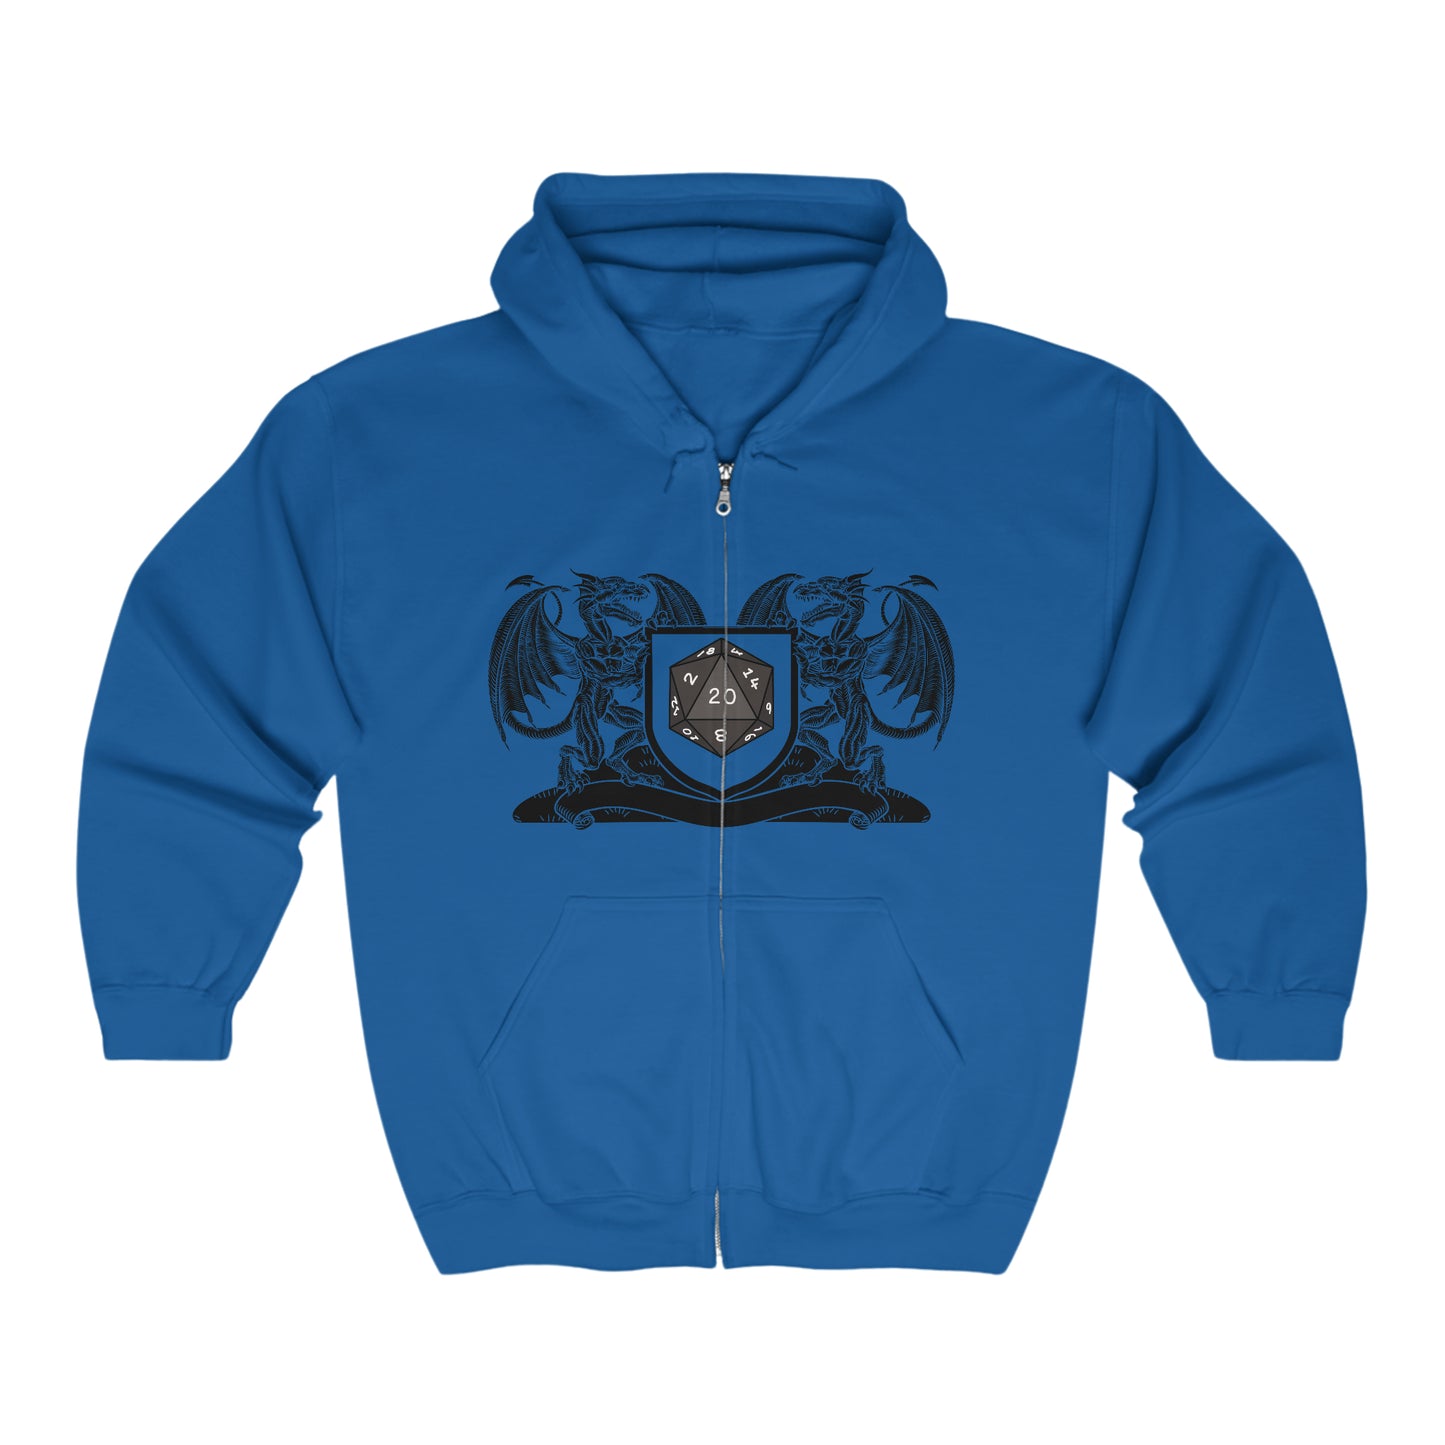 Dragons and Dice Heavy Blend™ Full Zip Hooded Sweatshirt, Classic Fit, Runs True To Size